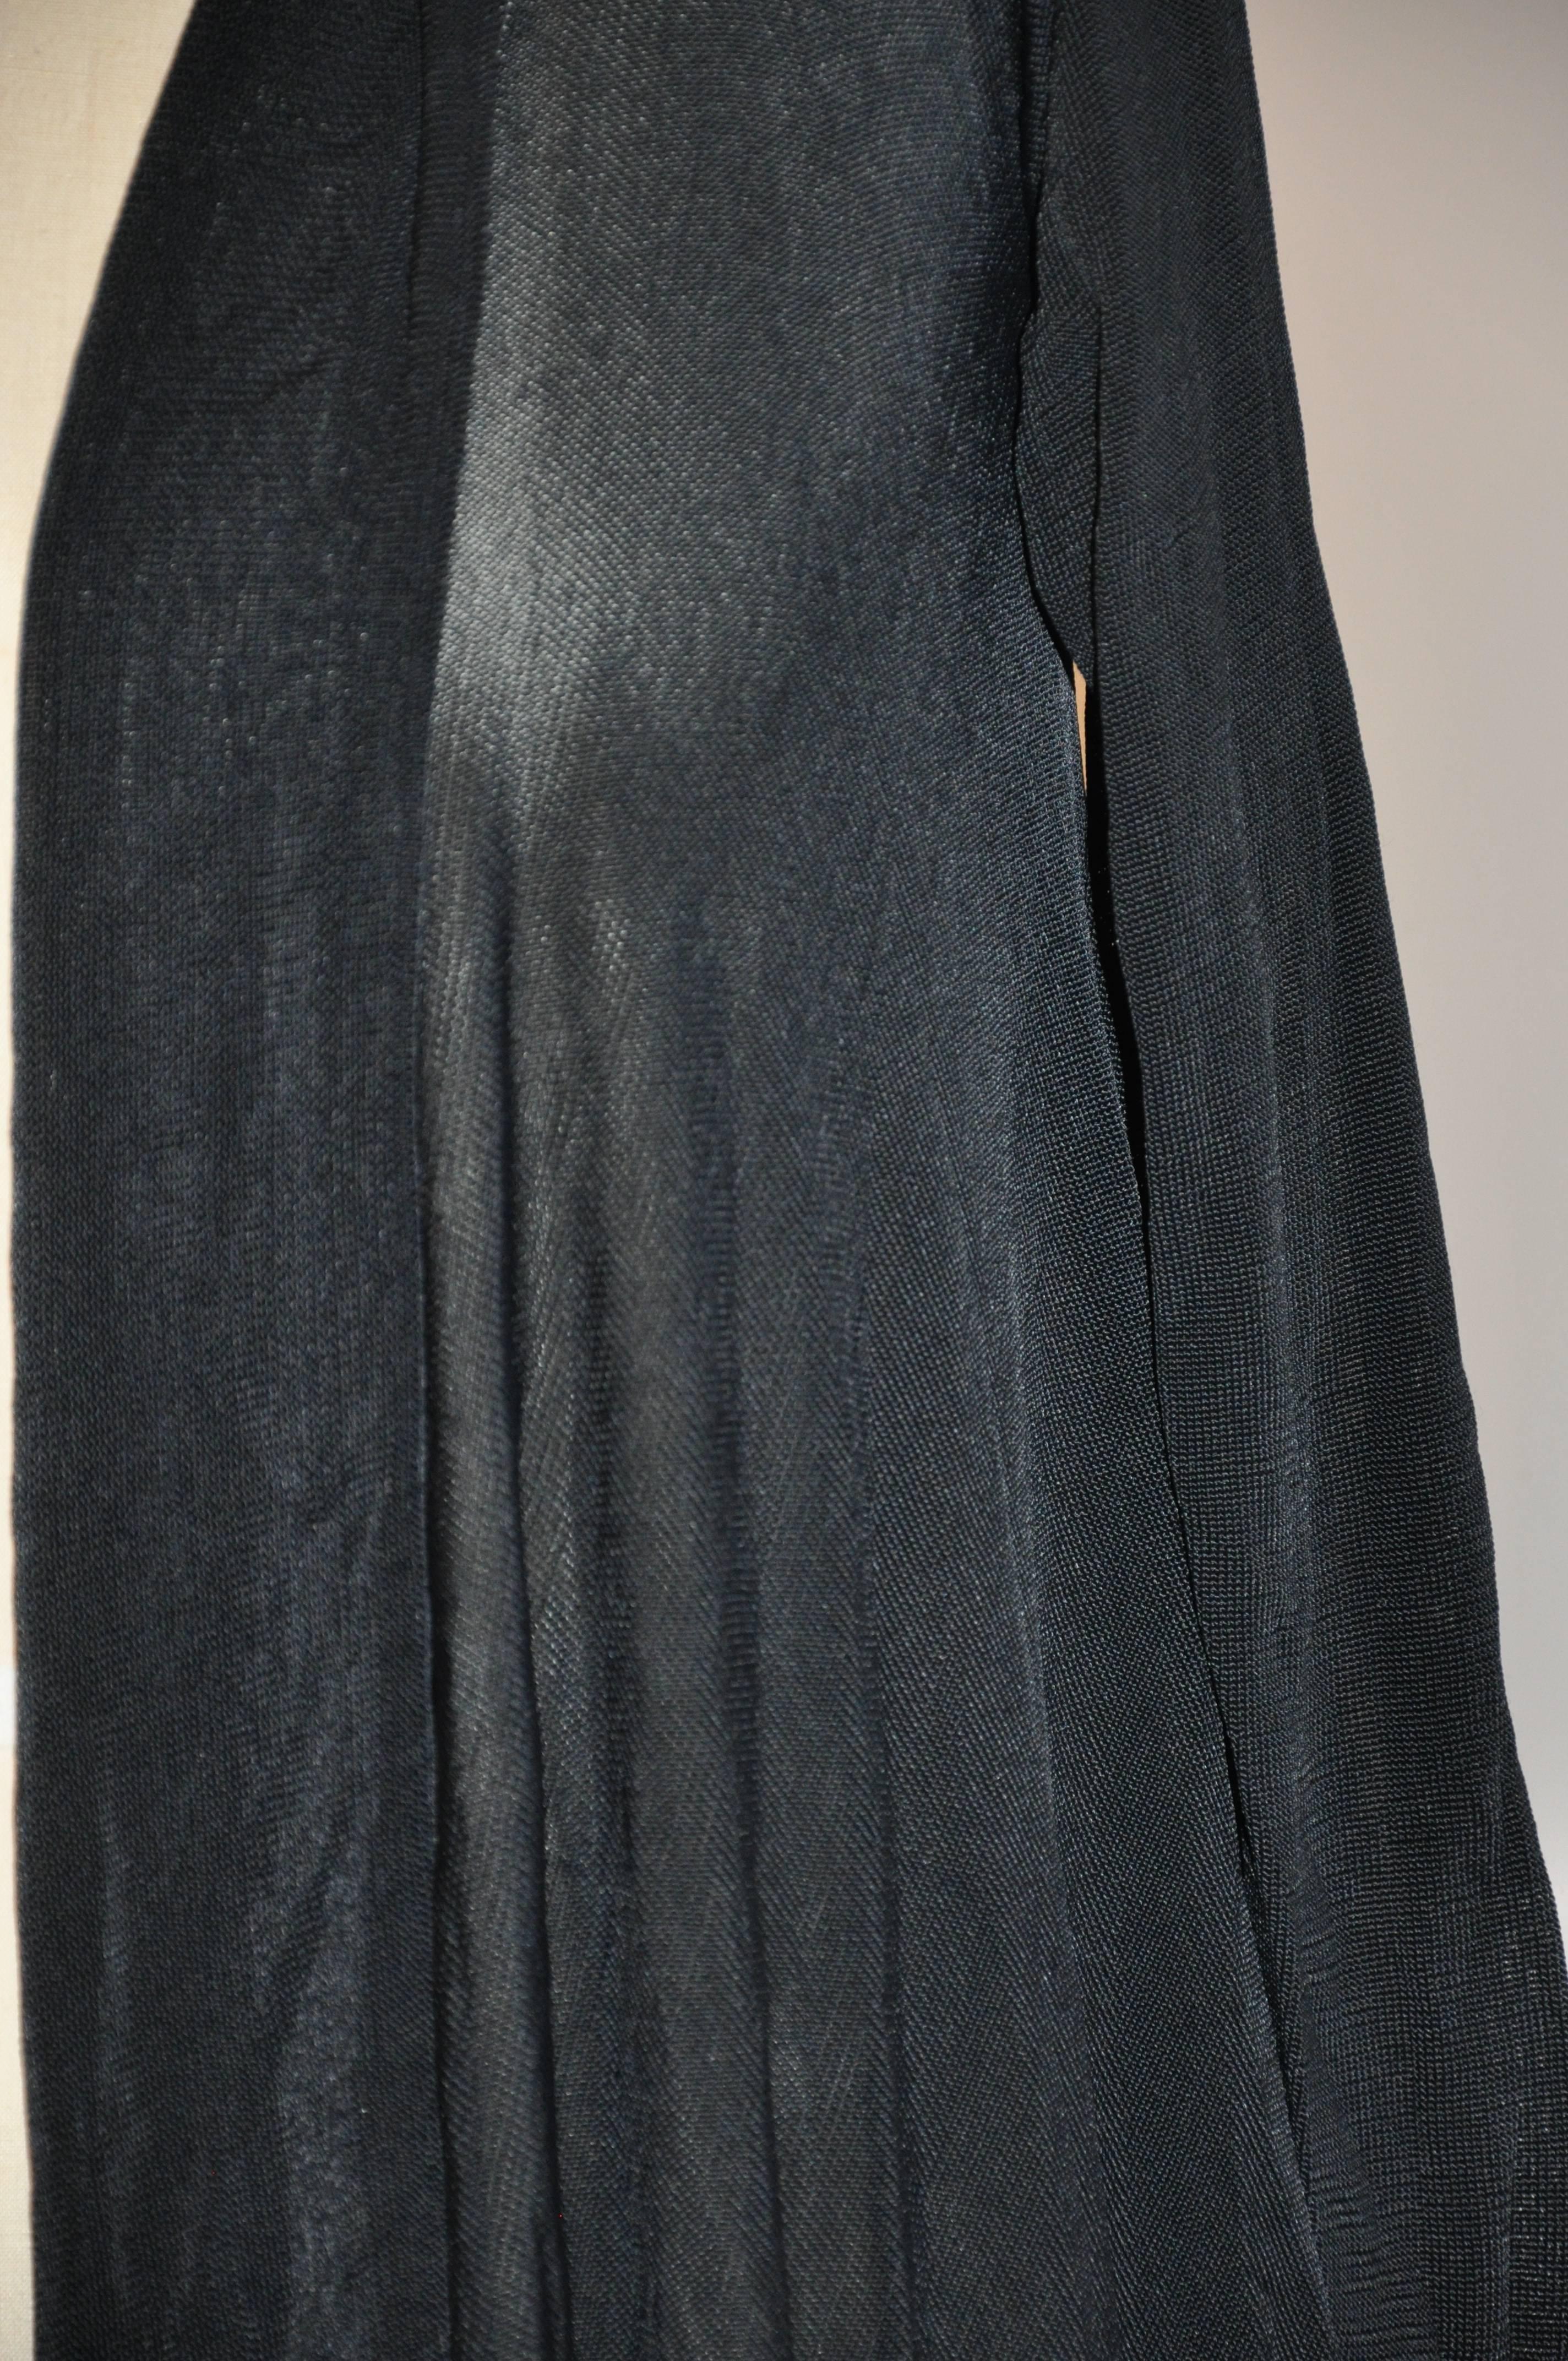 Herve Leger Black Jersey Asymmetric Draped Open Cardigan In Good Condition For Sale In New York, NY